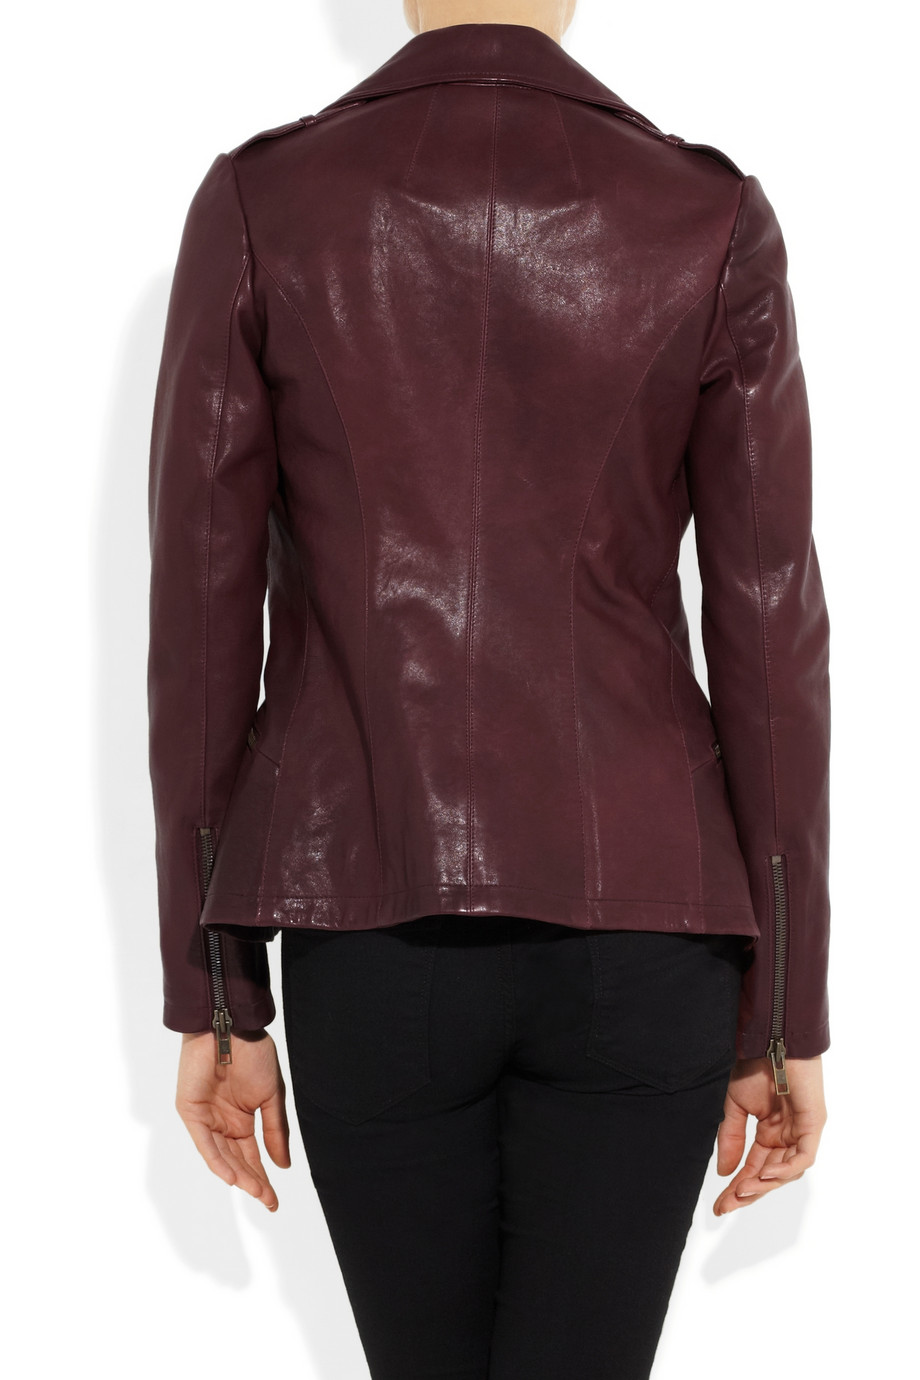 Lyst - Mcq Leather Biker Jacket in Red